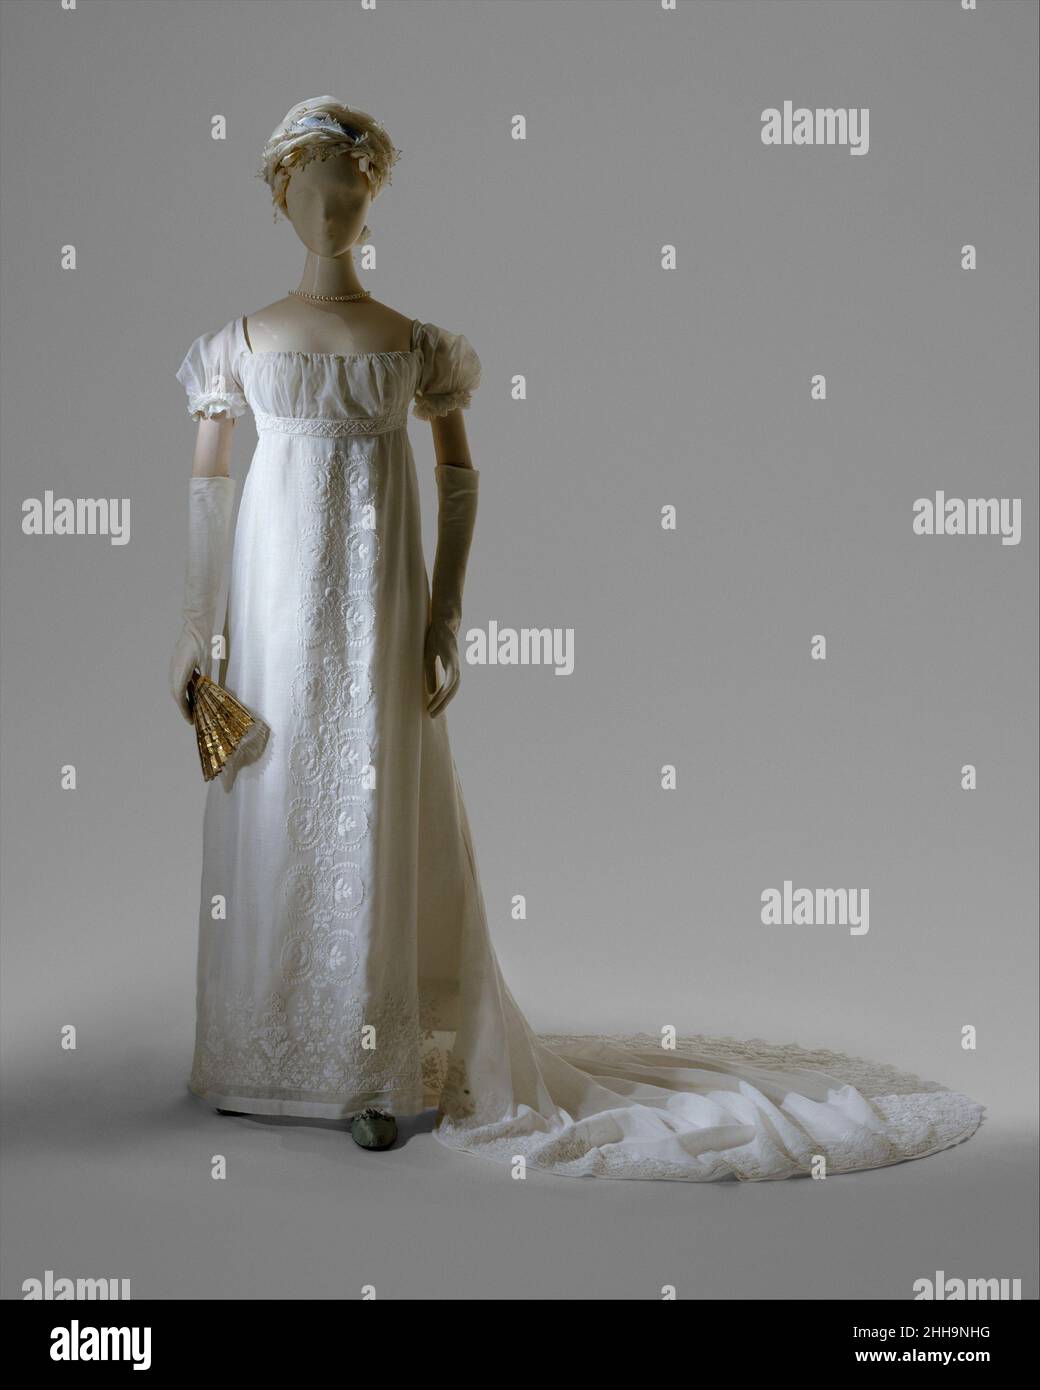 Evening dress 1804–5 French On December 24, 1803, Jerome Bonaparte  (1784—1860), brother of Napoleon, wed Elizabeth Patterson (1785—1879) of  Baltimore. The beautiful and fashionable young American was married in a  dress of